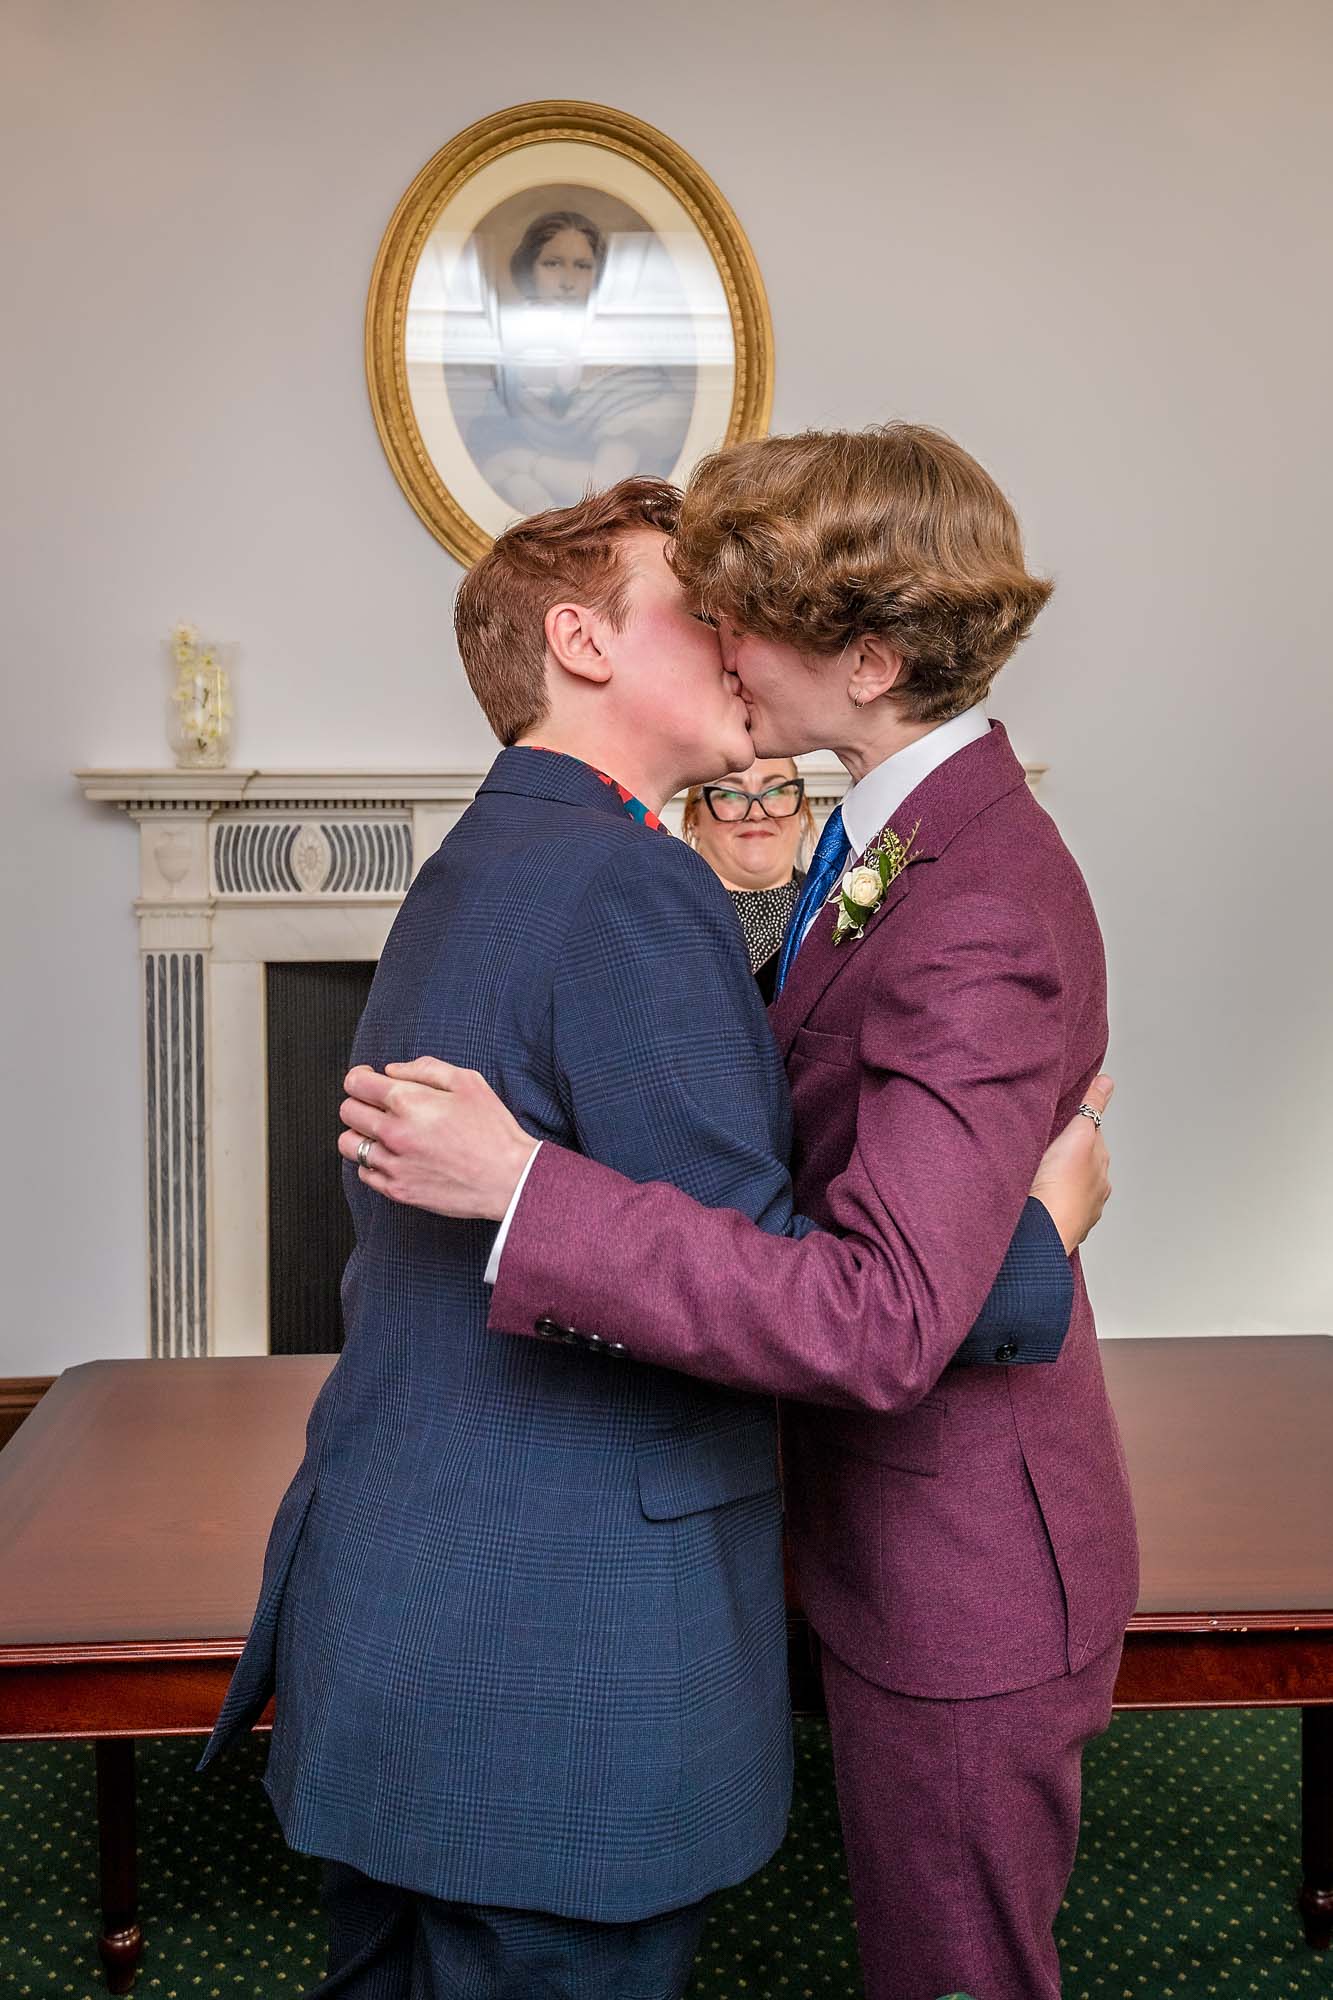 Newlywed brides have their first kiss in Bromley